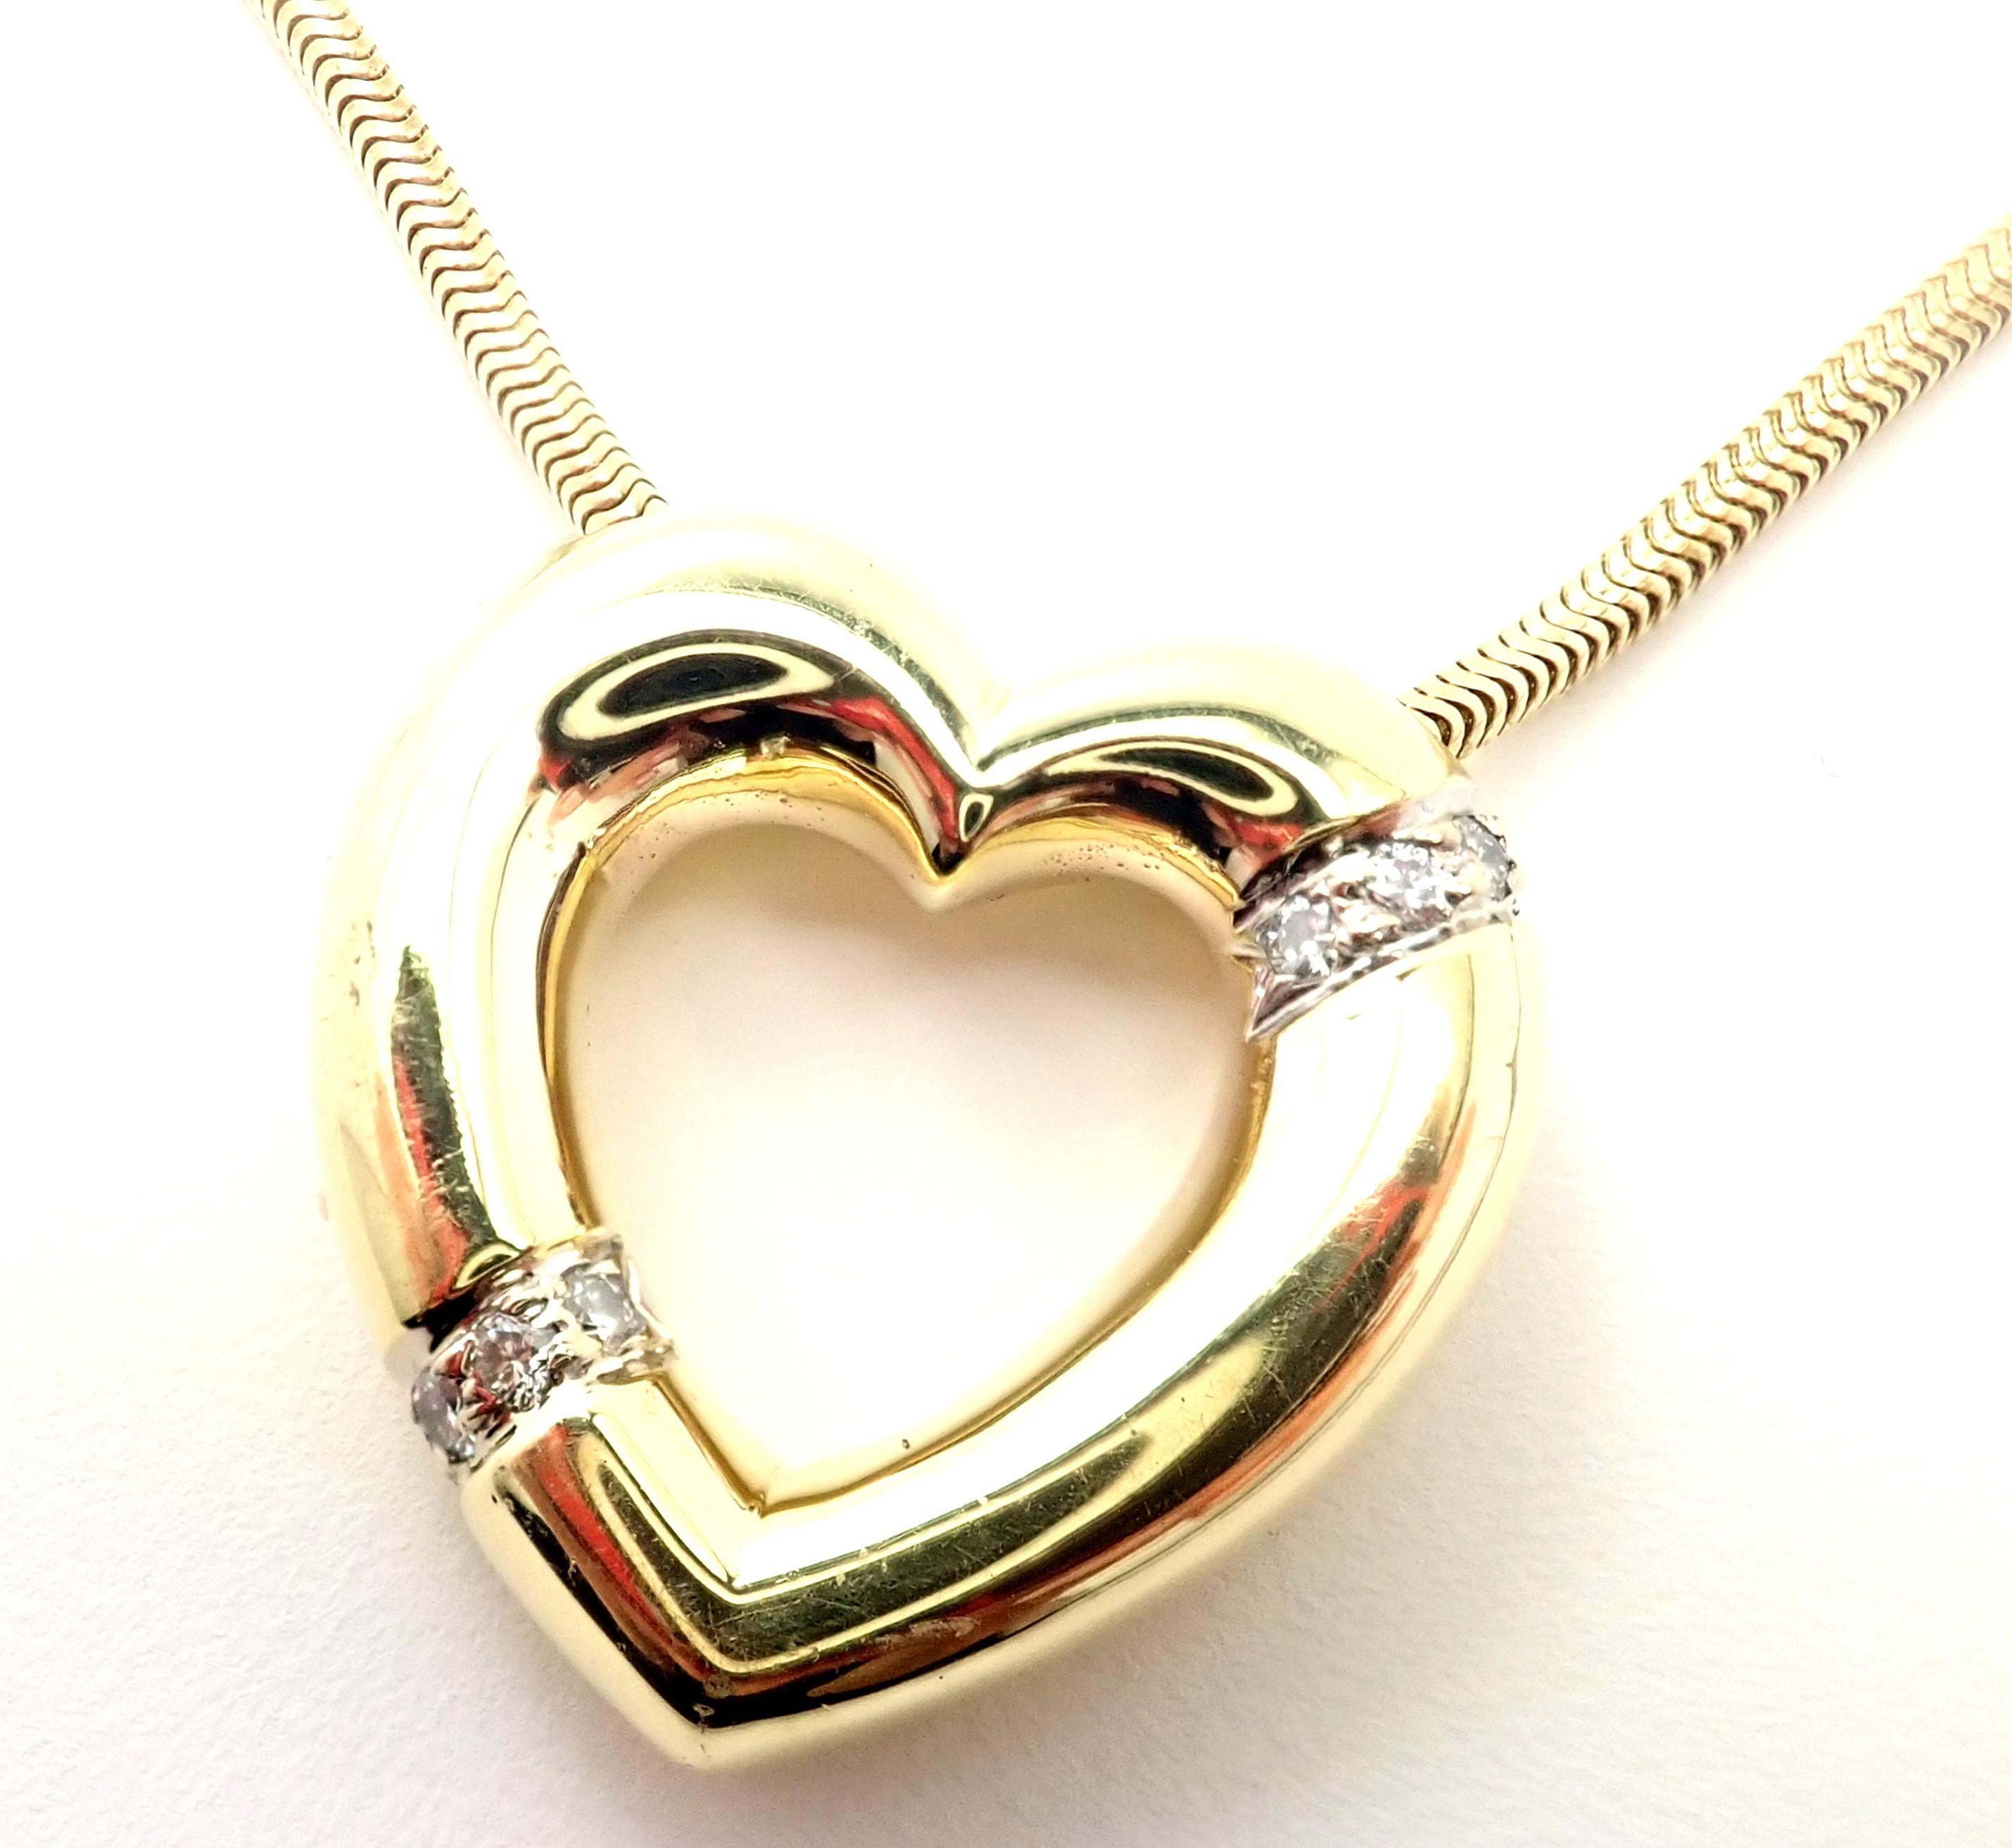 18k Yellow Gold Diamond Heart Pendant Necklace by Paloma Picasso for Tiffany & Co.
With 8 Round brilliant cut diamonds VS1 clarity, G color total weight approx. .15ct
Details:
Length: 19